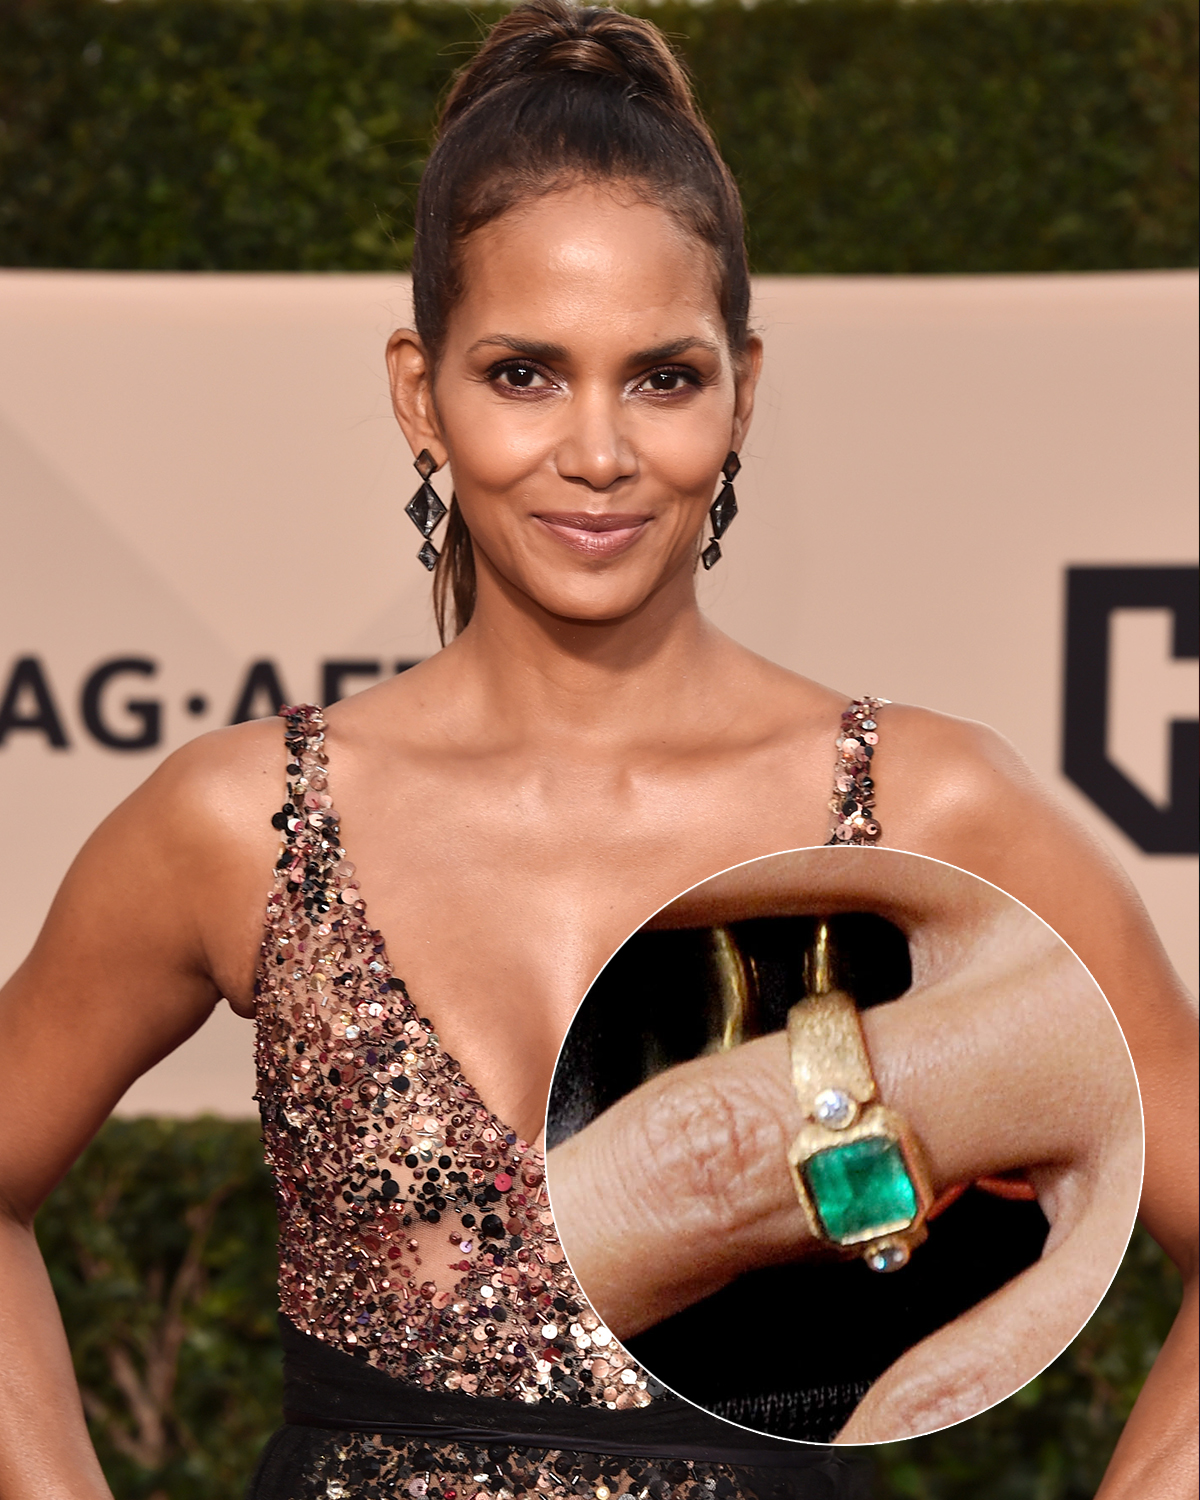 Halle Berry engagement ring.